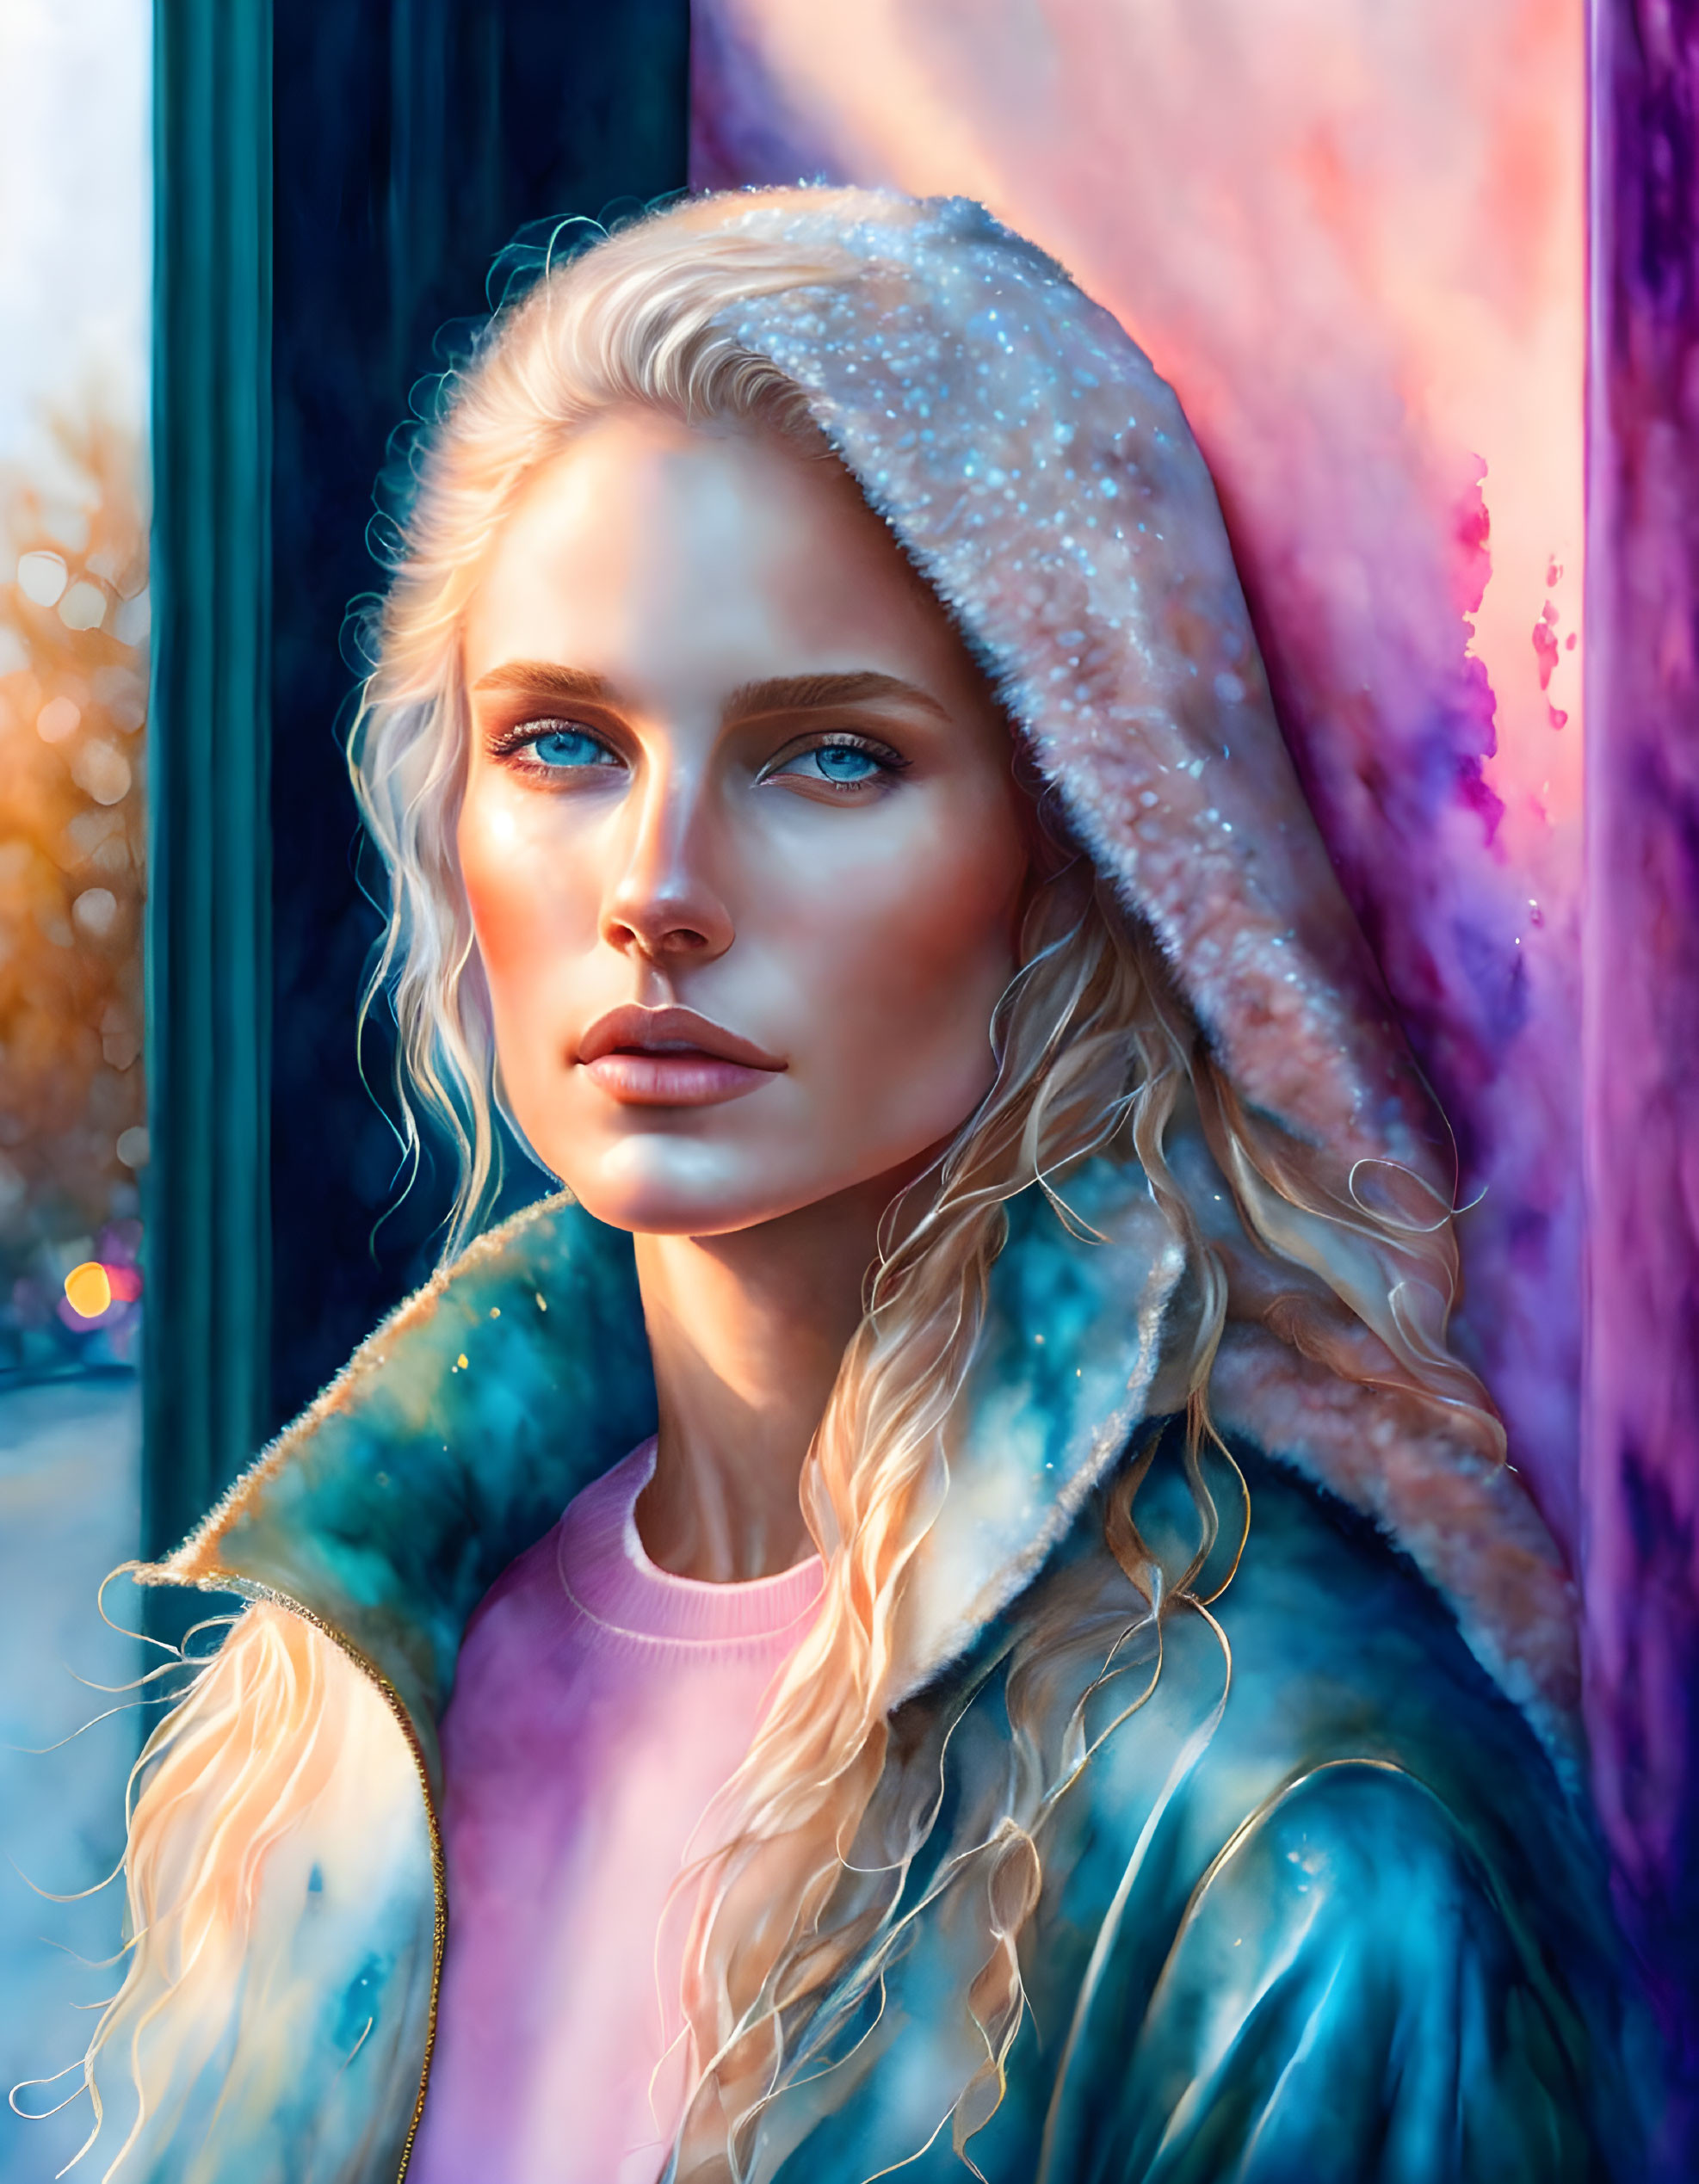 Blond Woman in Hooded Coat with Blue Eyes on Colorful Background